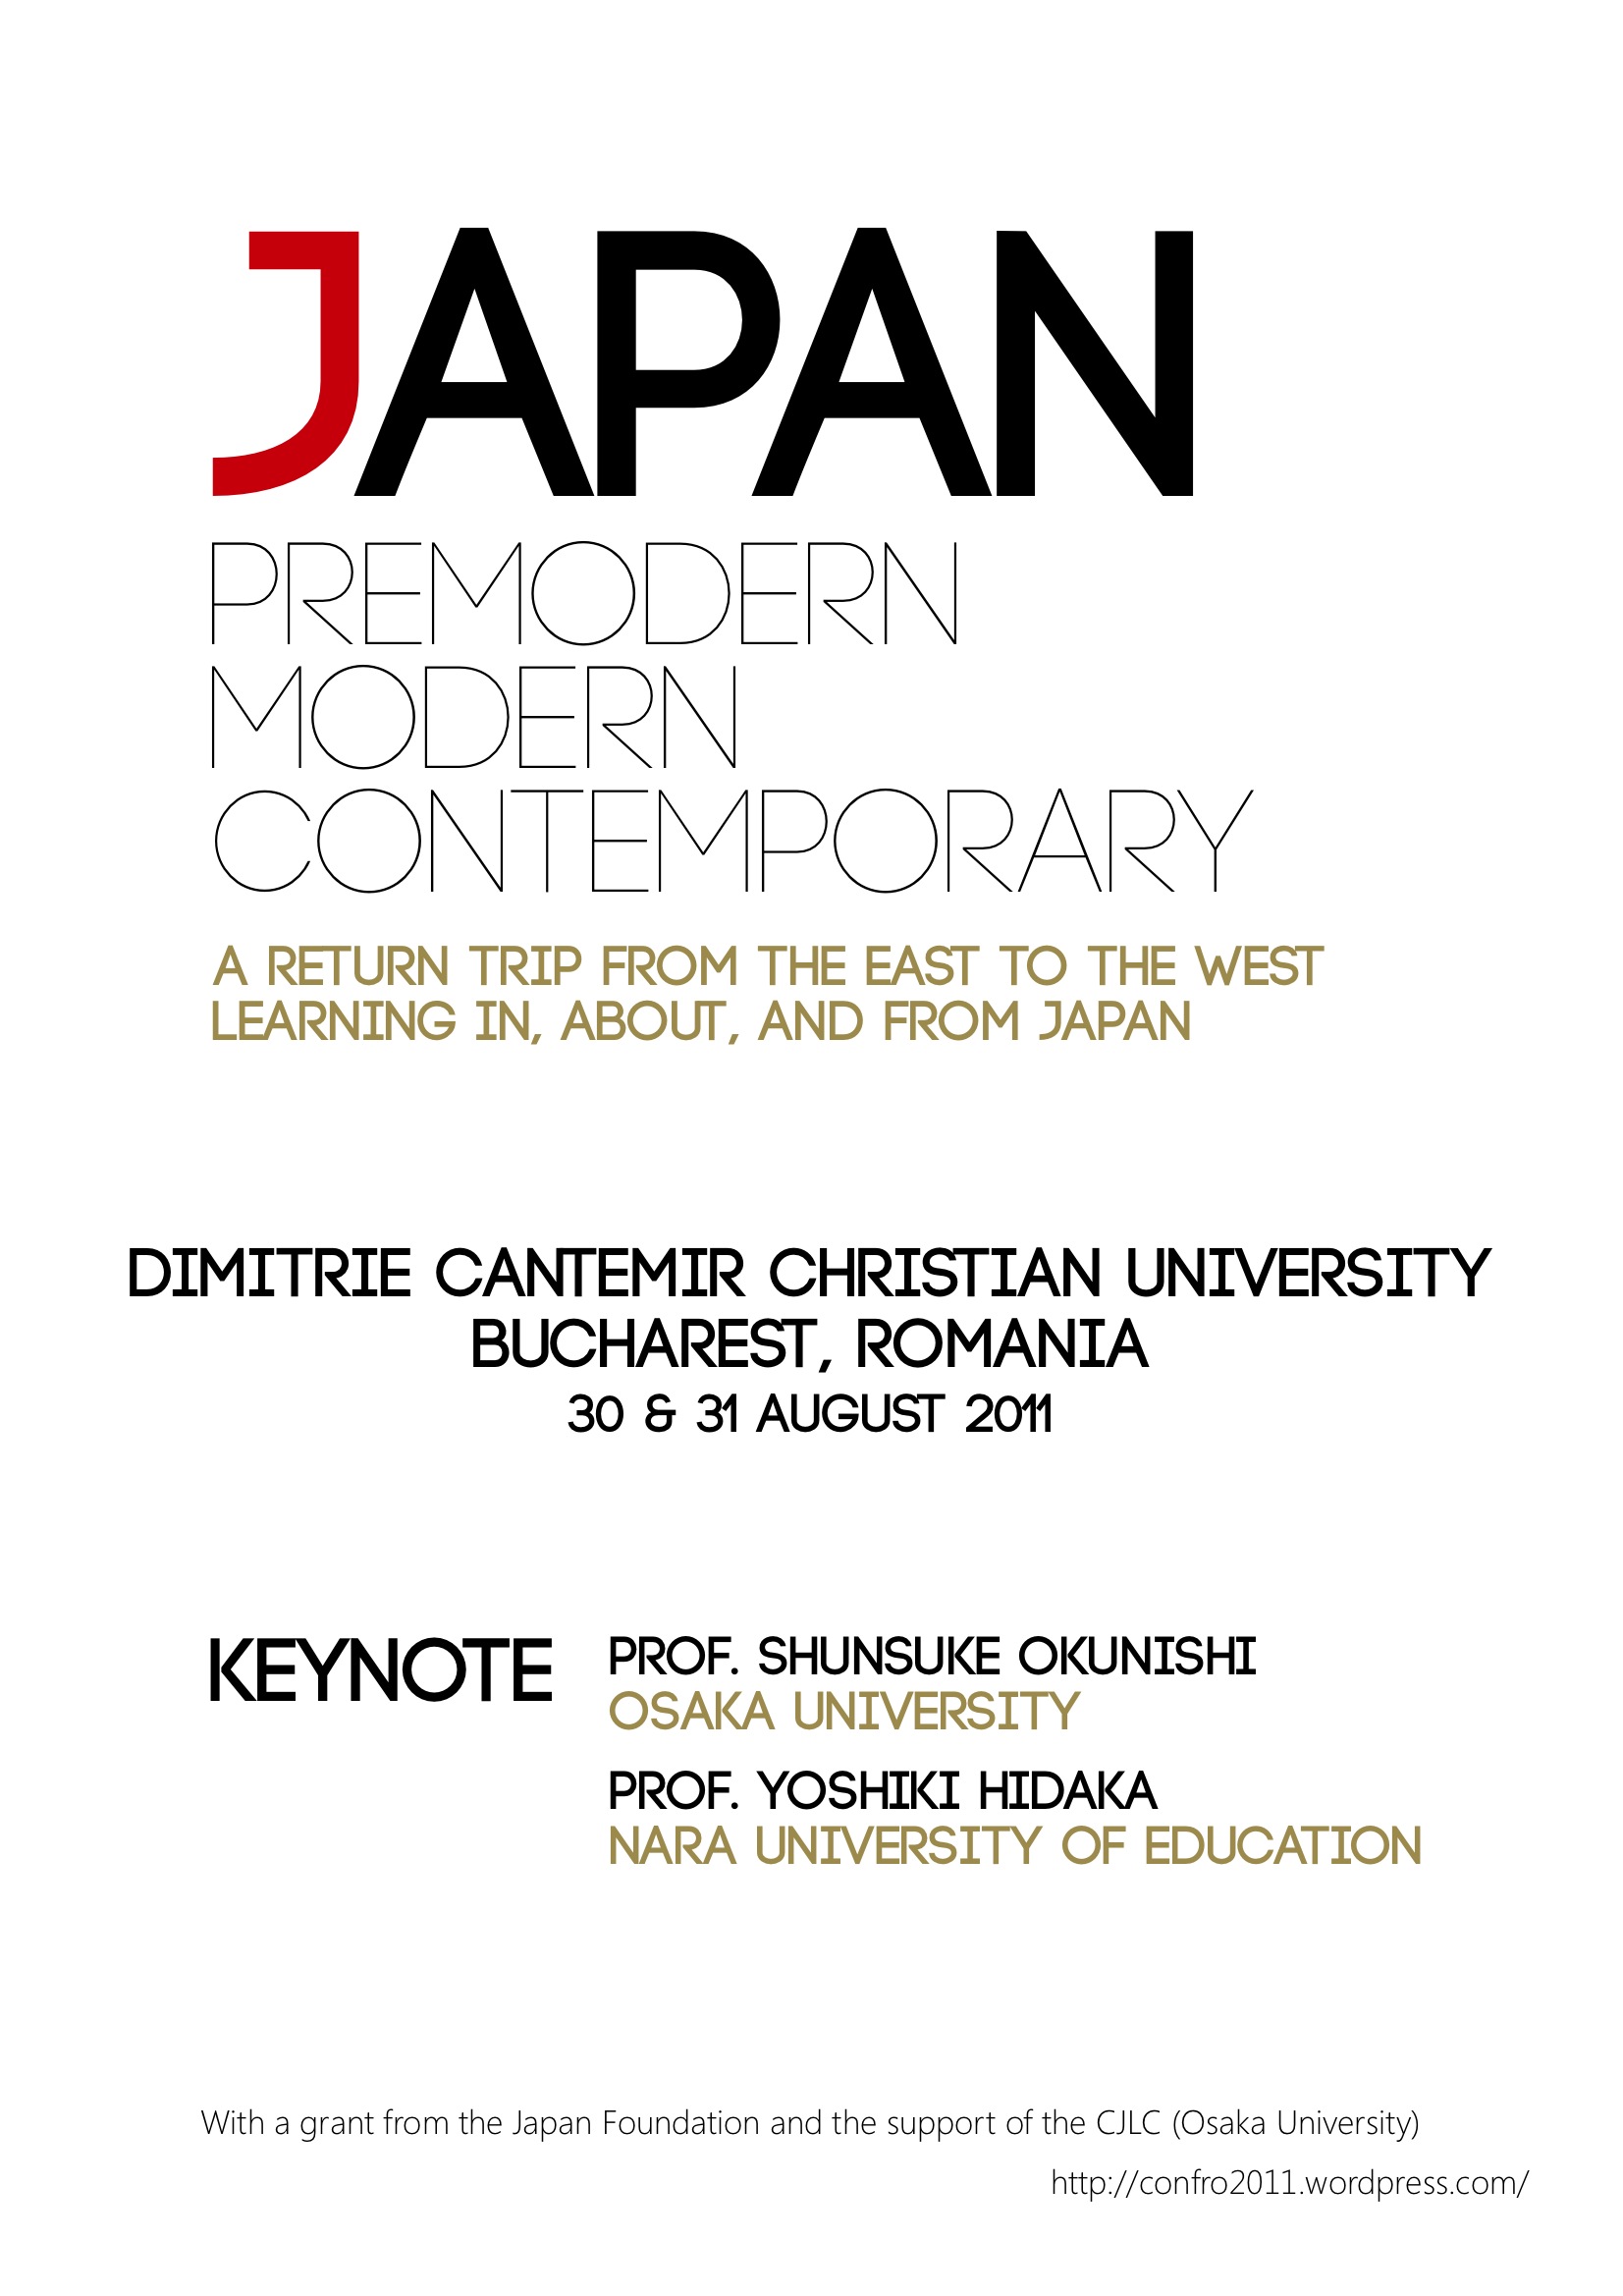 Cheap write my essay modernisation on japan, the emperor and the region